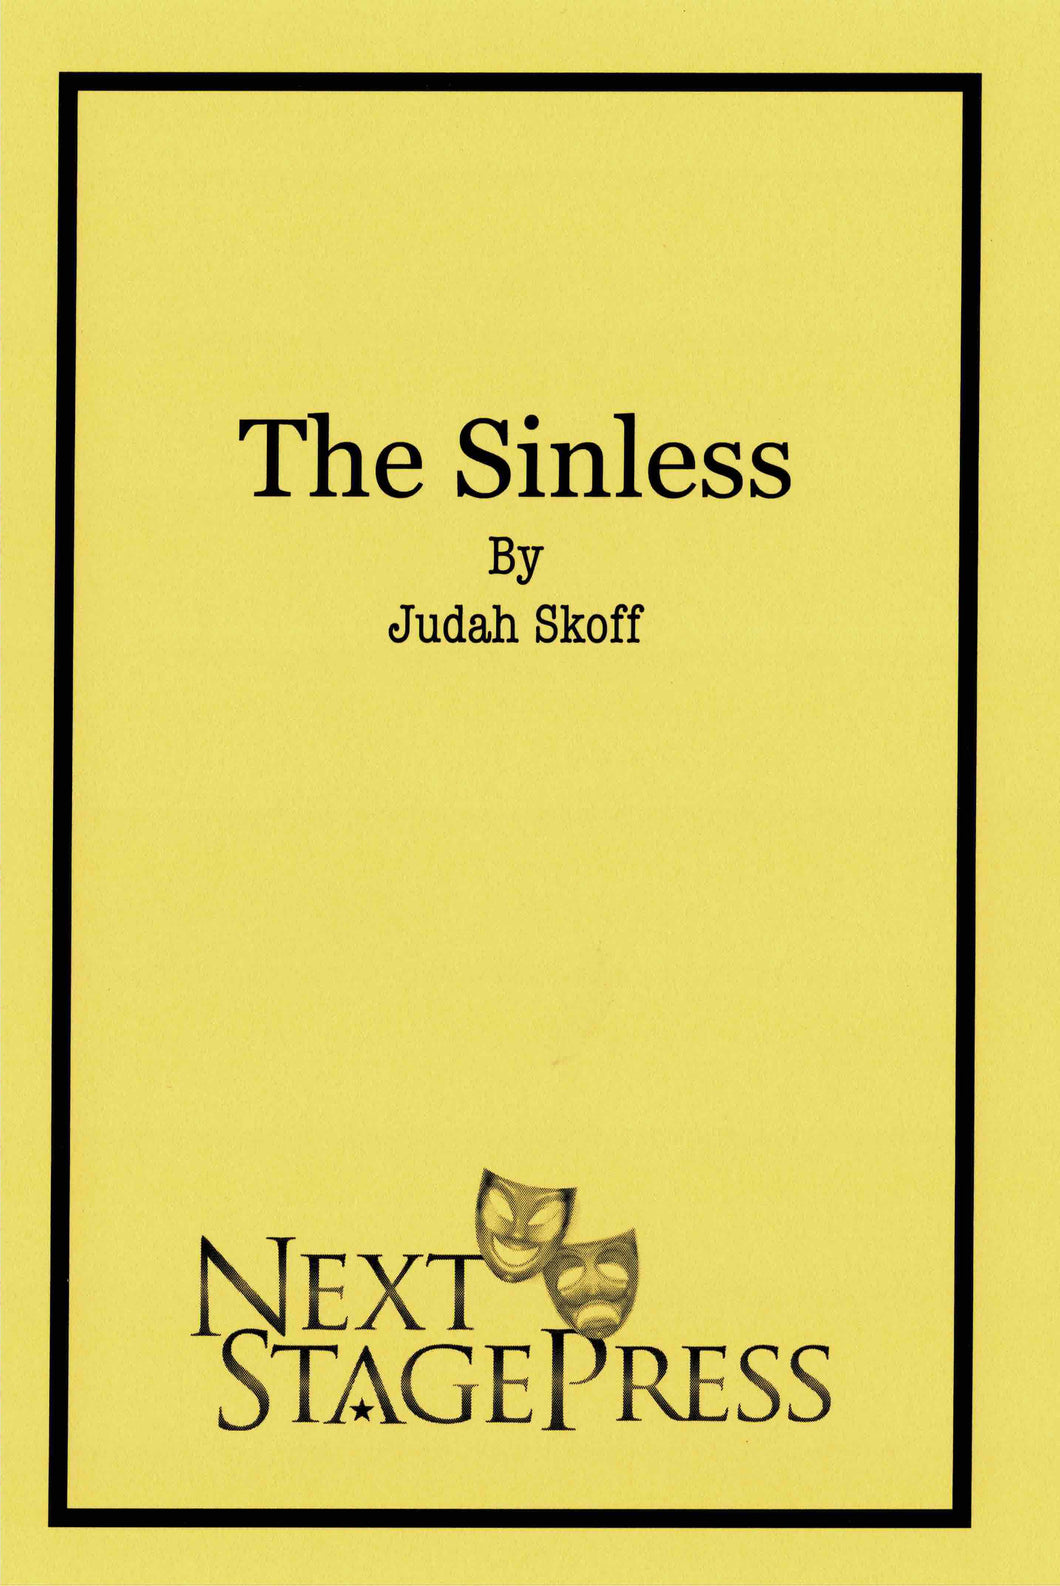 The Sinless